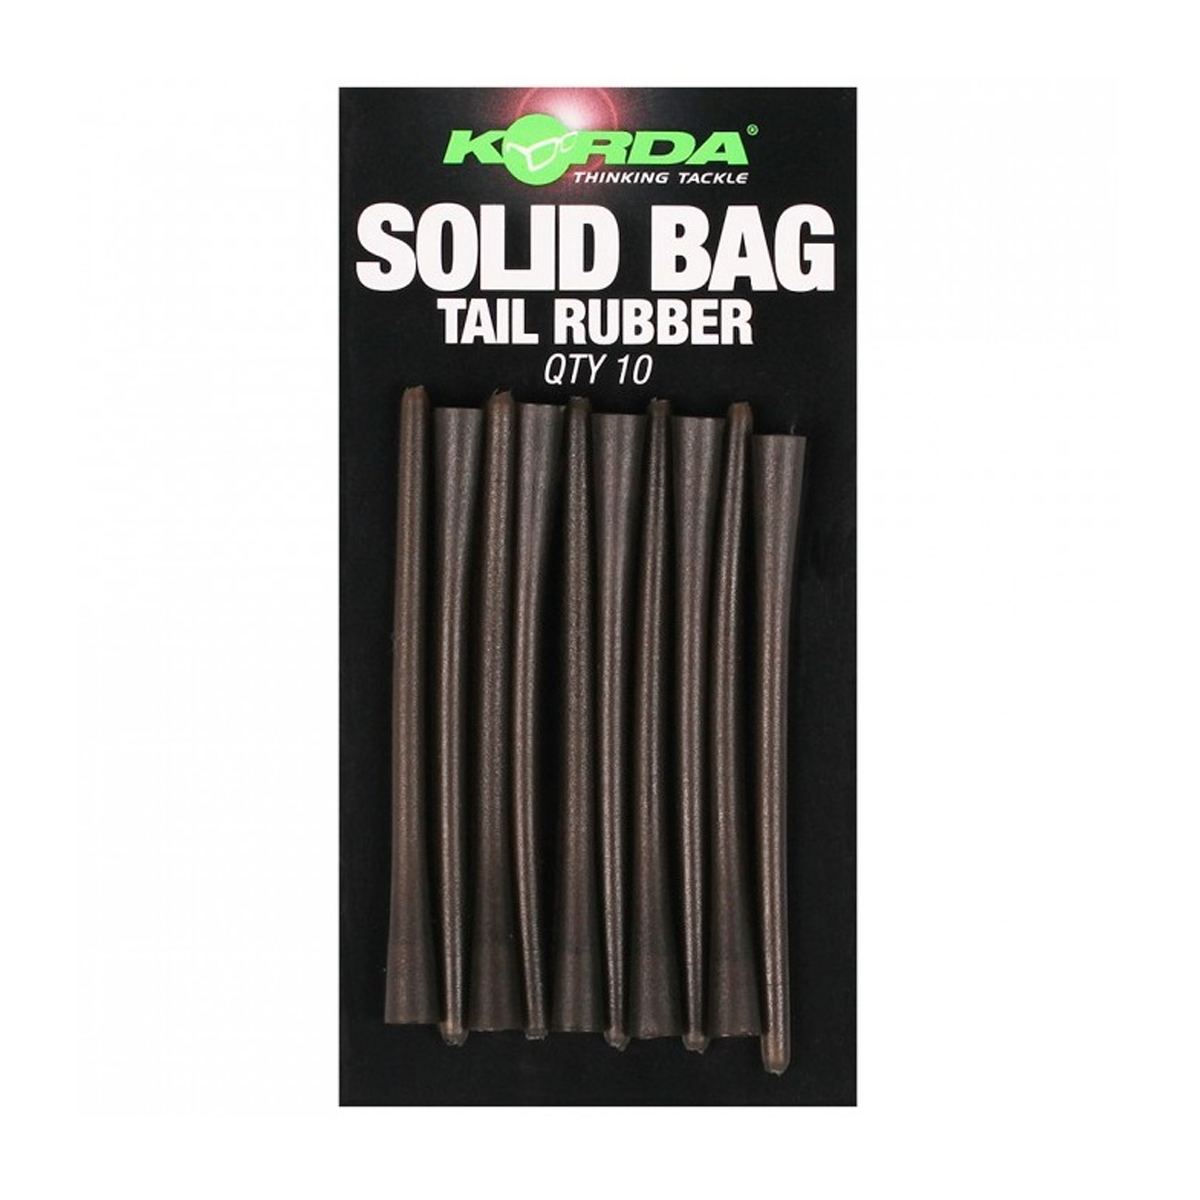 Korda solid bag tail rubbers